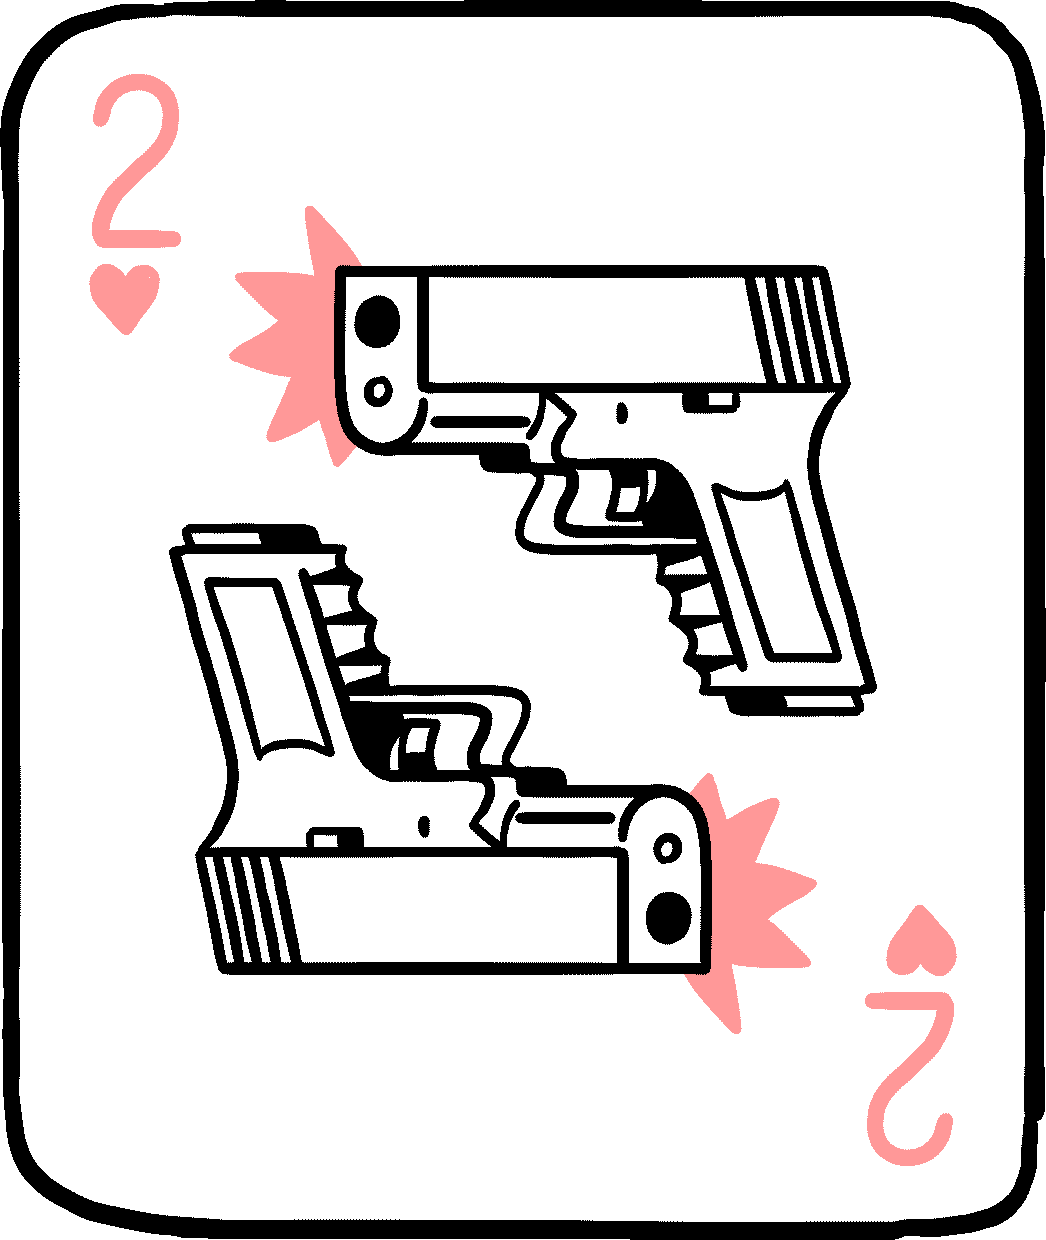 A two of hearts with a glock pistol on the front